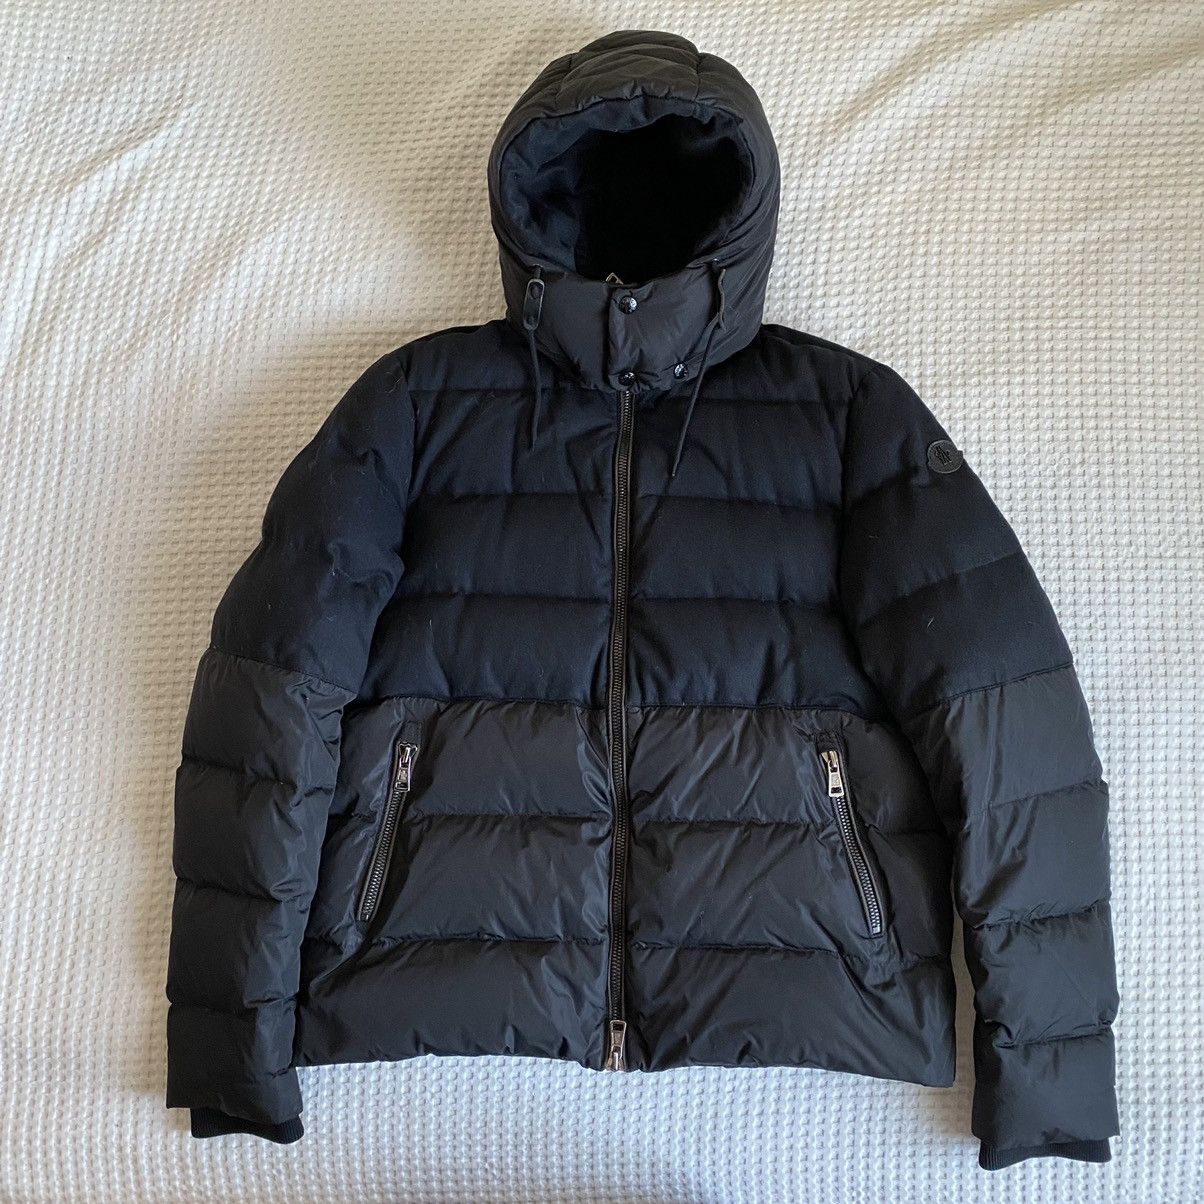 Moncler Moncler Wool Nylon Quilted Down Jacket | Grailed